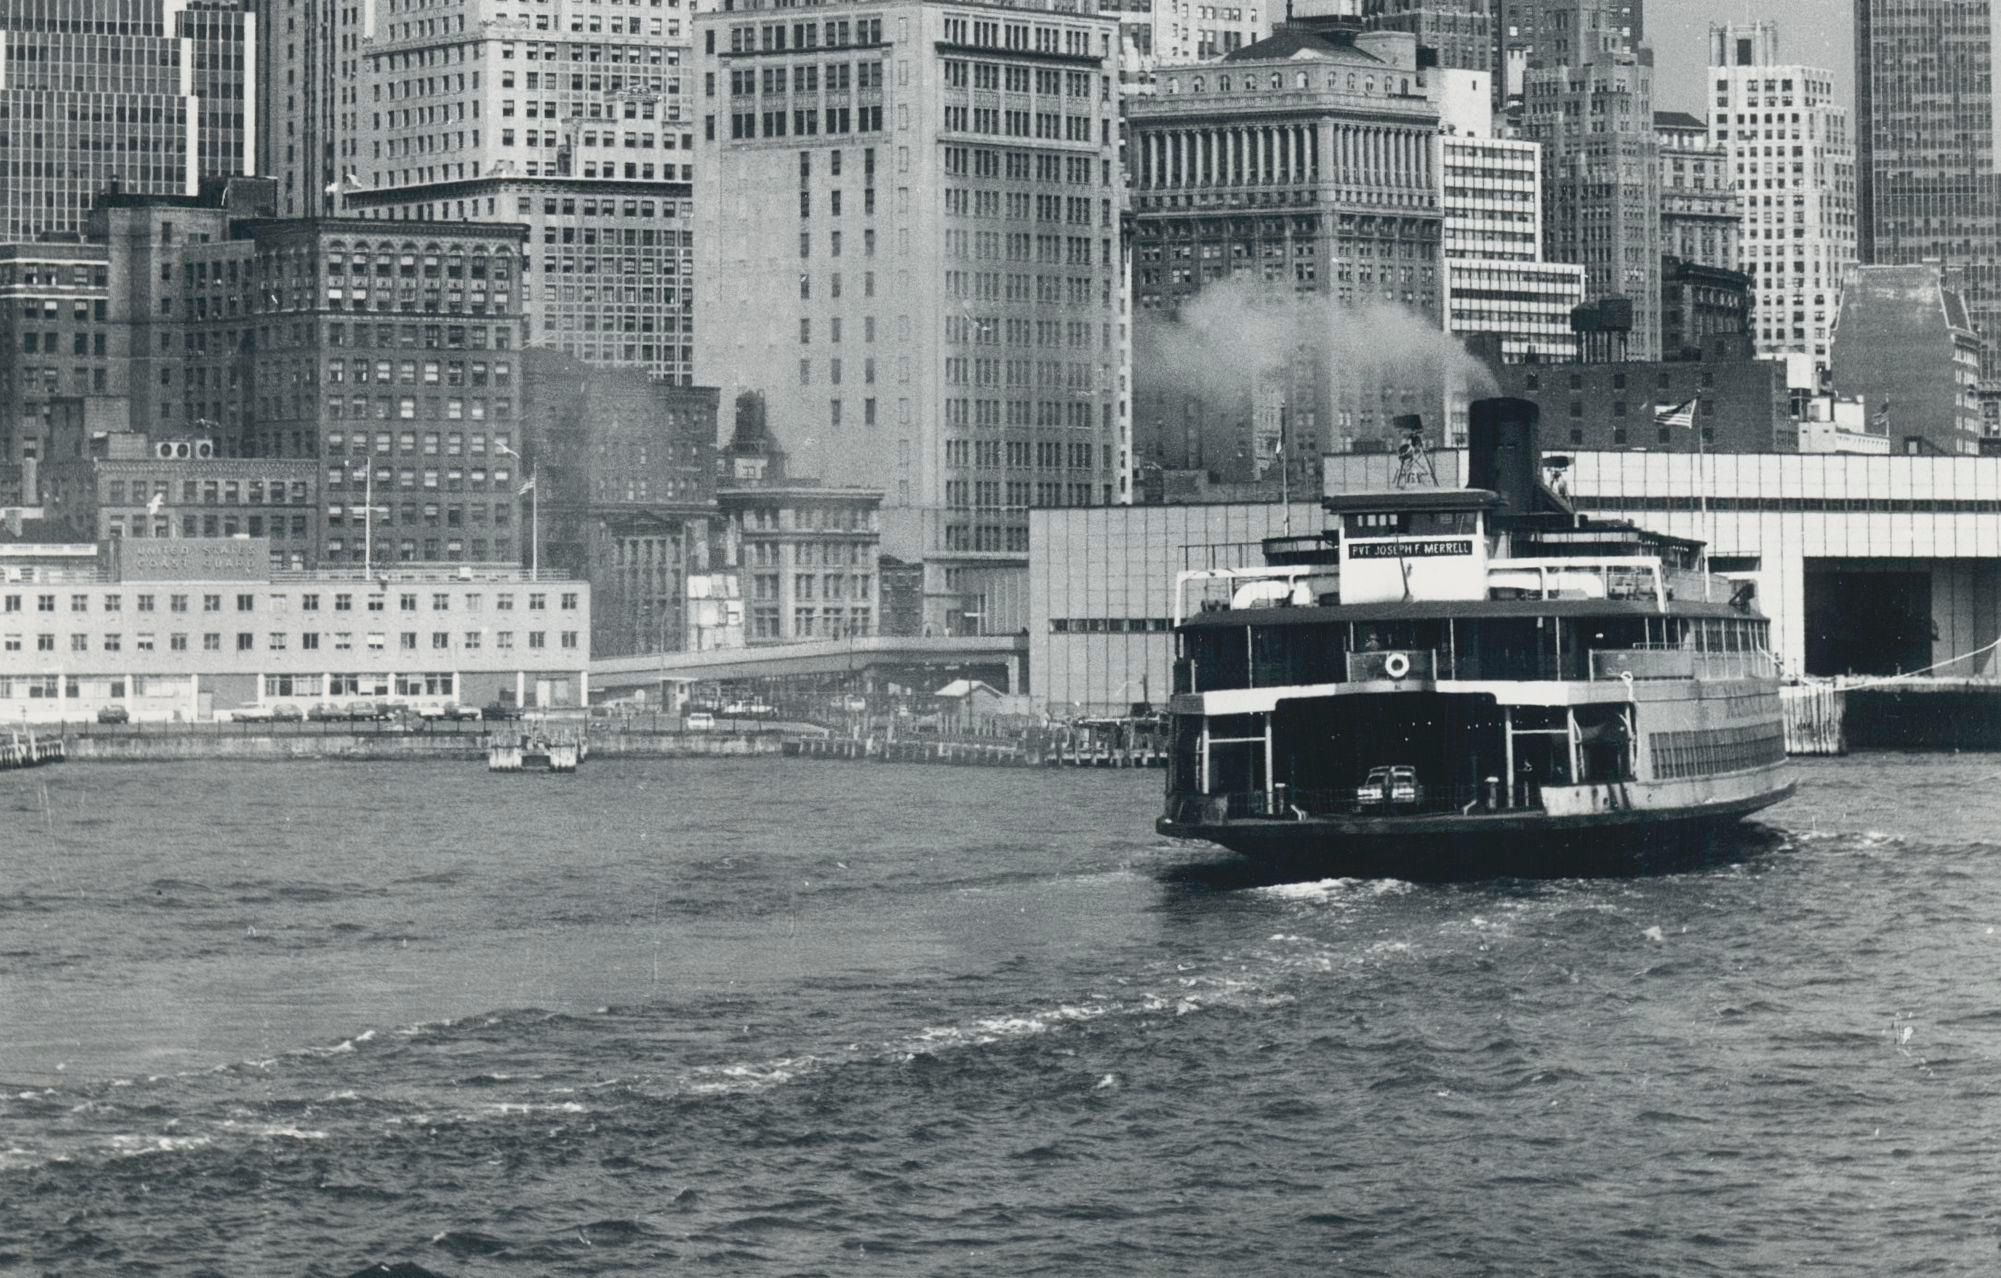 New York City, Waterfront, Black and White, USA 1960s, 23, 4 x 17, 3 cm - Modern Photograph by Erich Andres